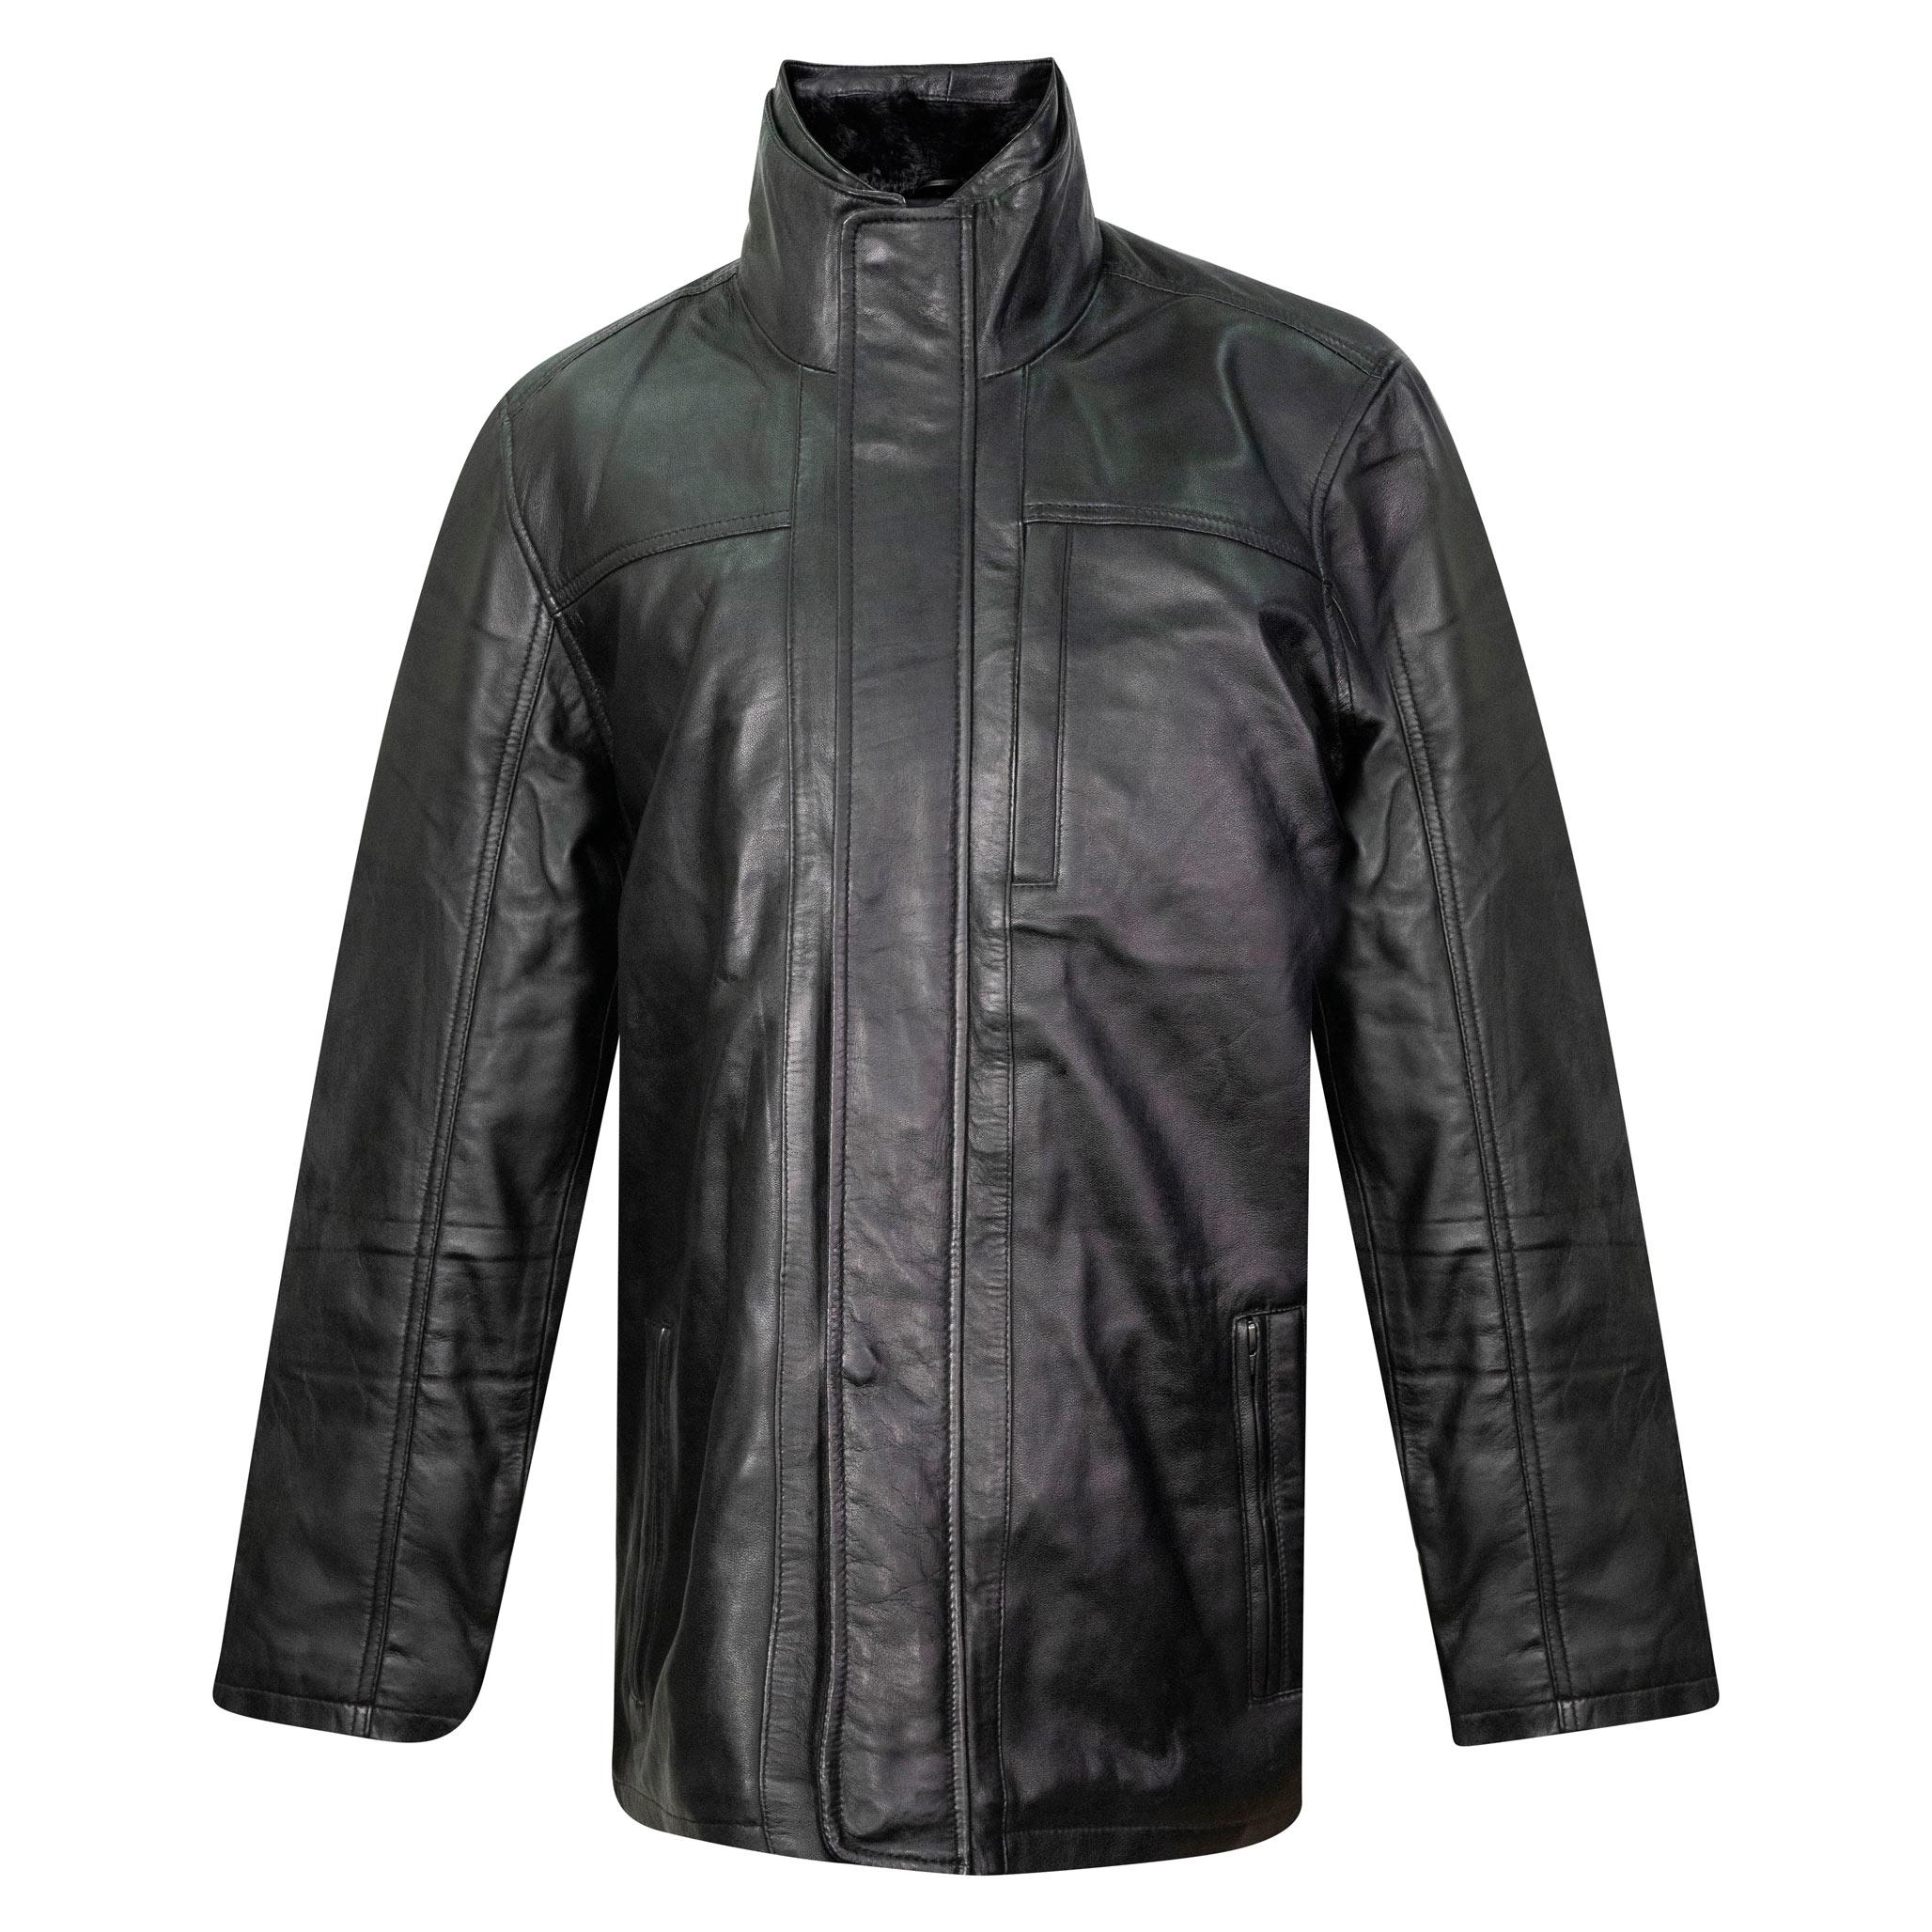 A long black mens leather coat, with a comfortable fit.